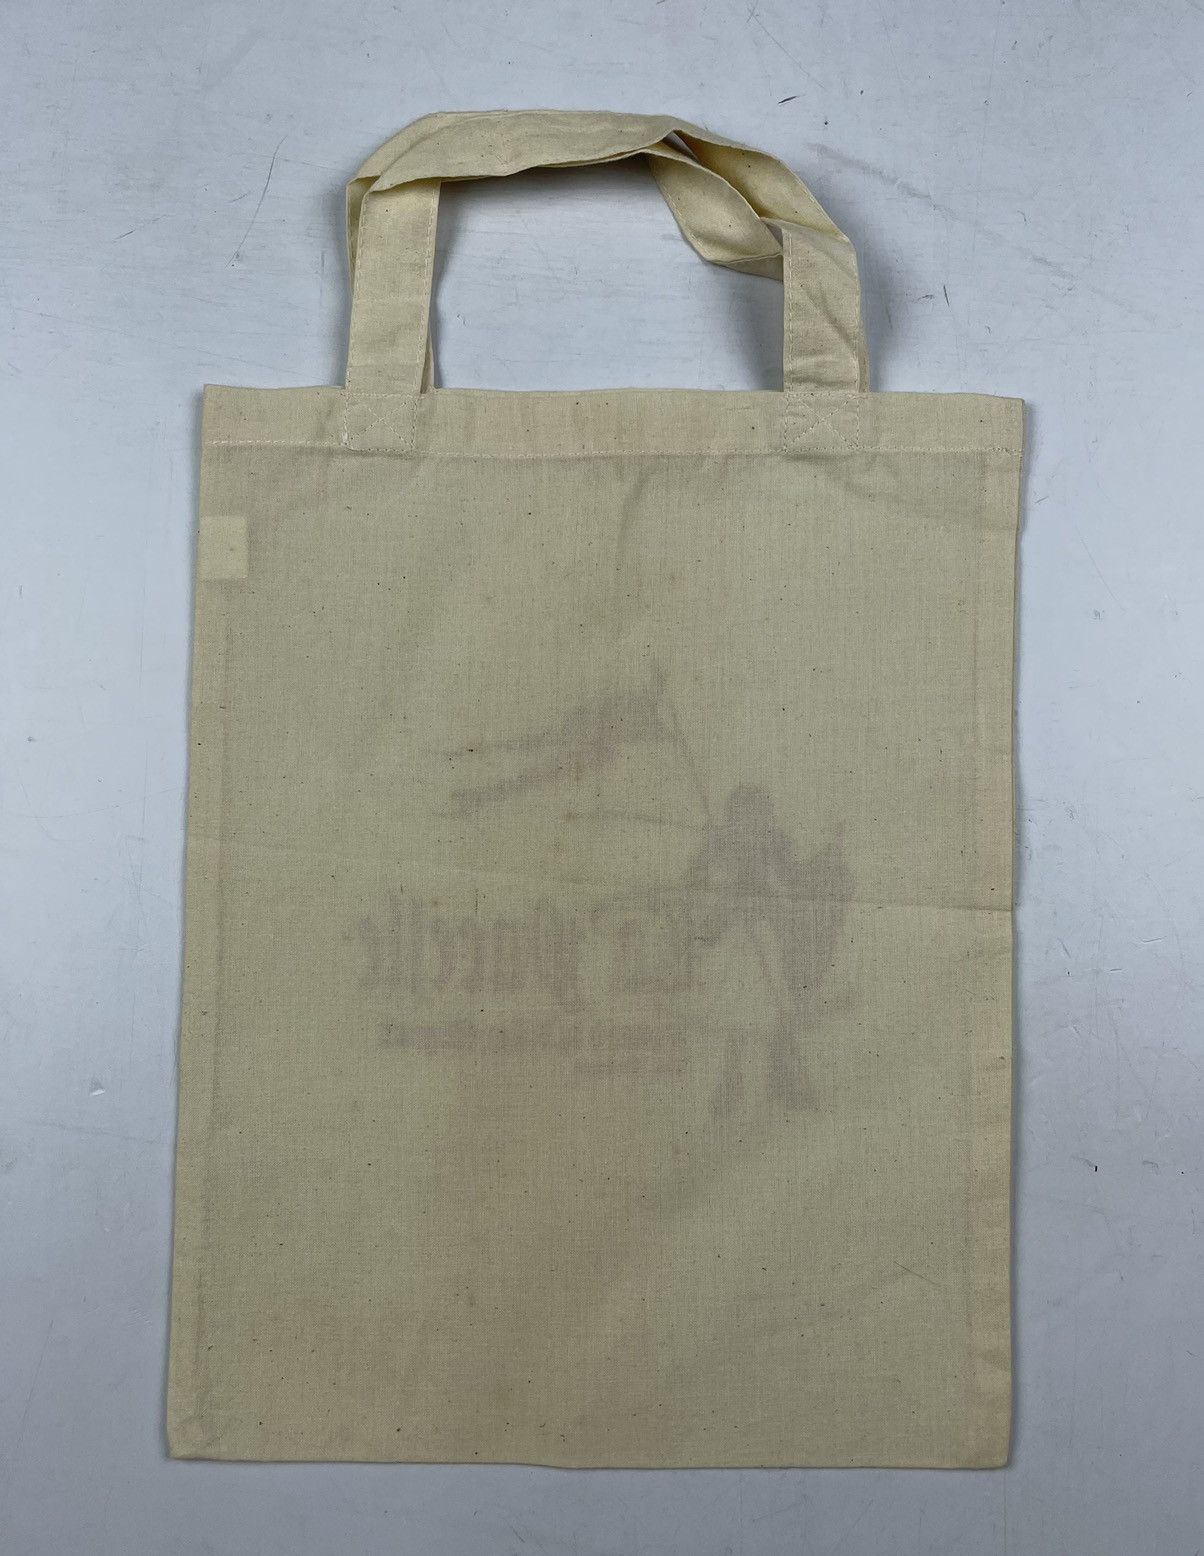 Japanese Brand japan anime tote bag t2 Size ONE SIZE - 4 Thumbnail